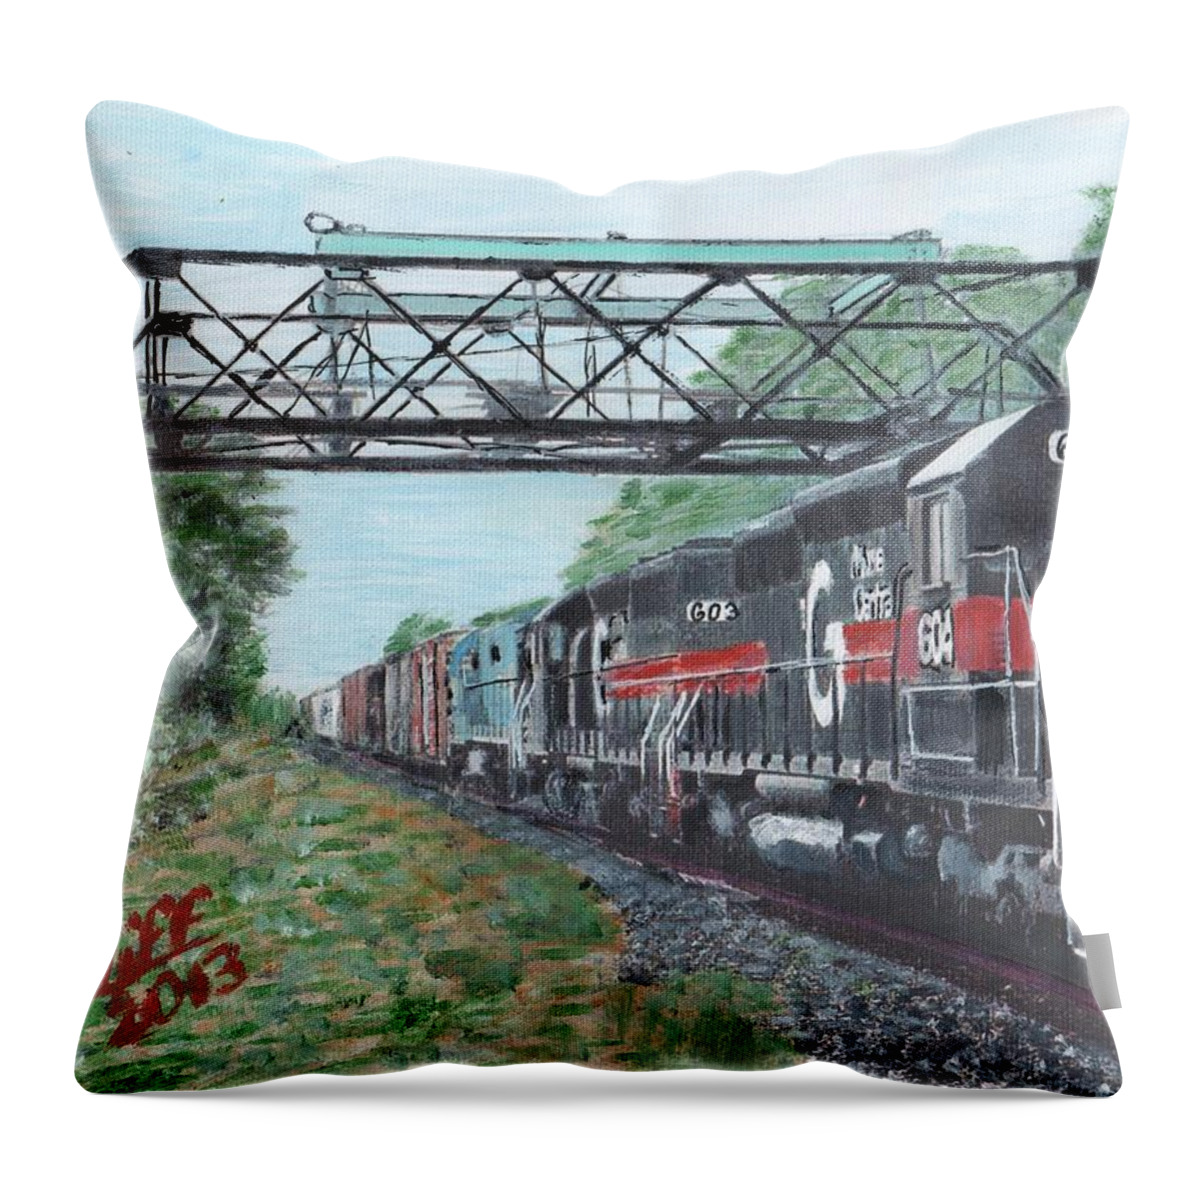 Trains Throw Pillow featuring the painting Last Train Under the Bridge by Cliff Wilson